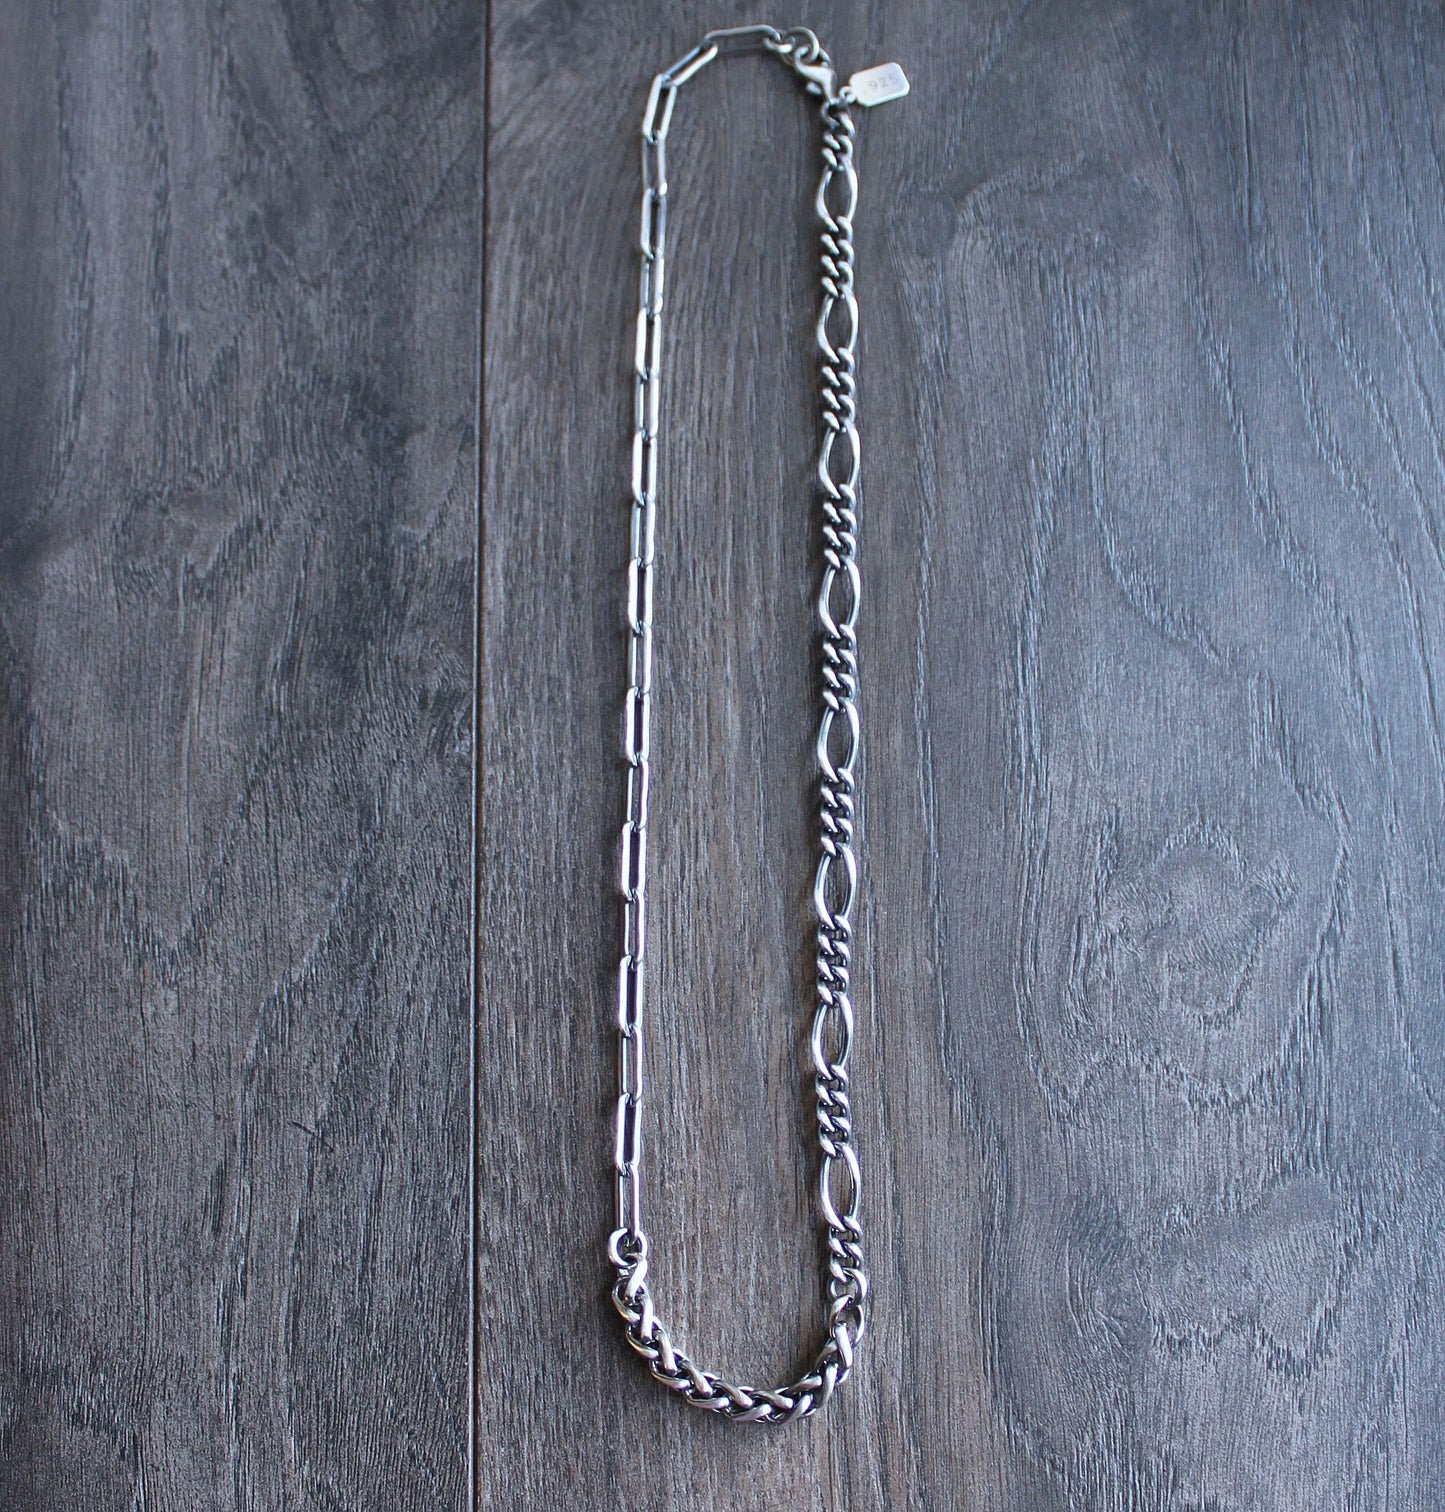 Men's sterling silver heavy chain necklace